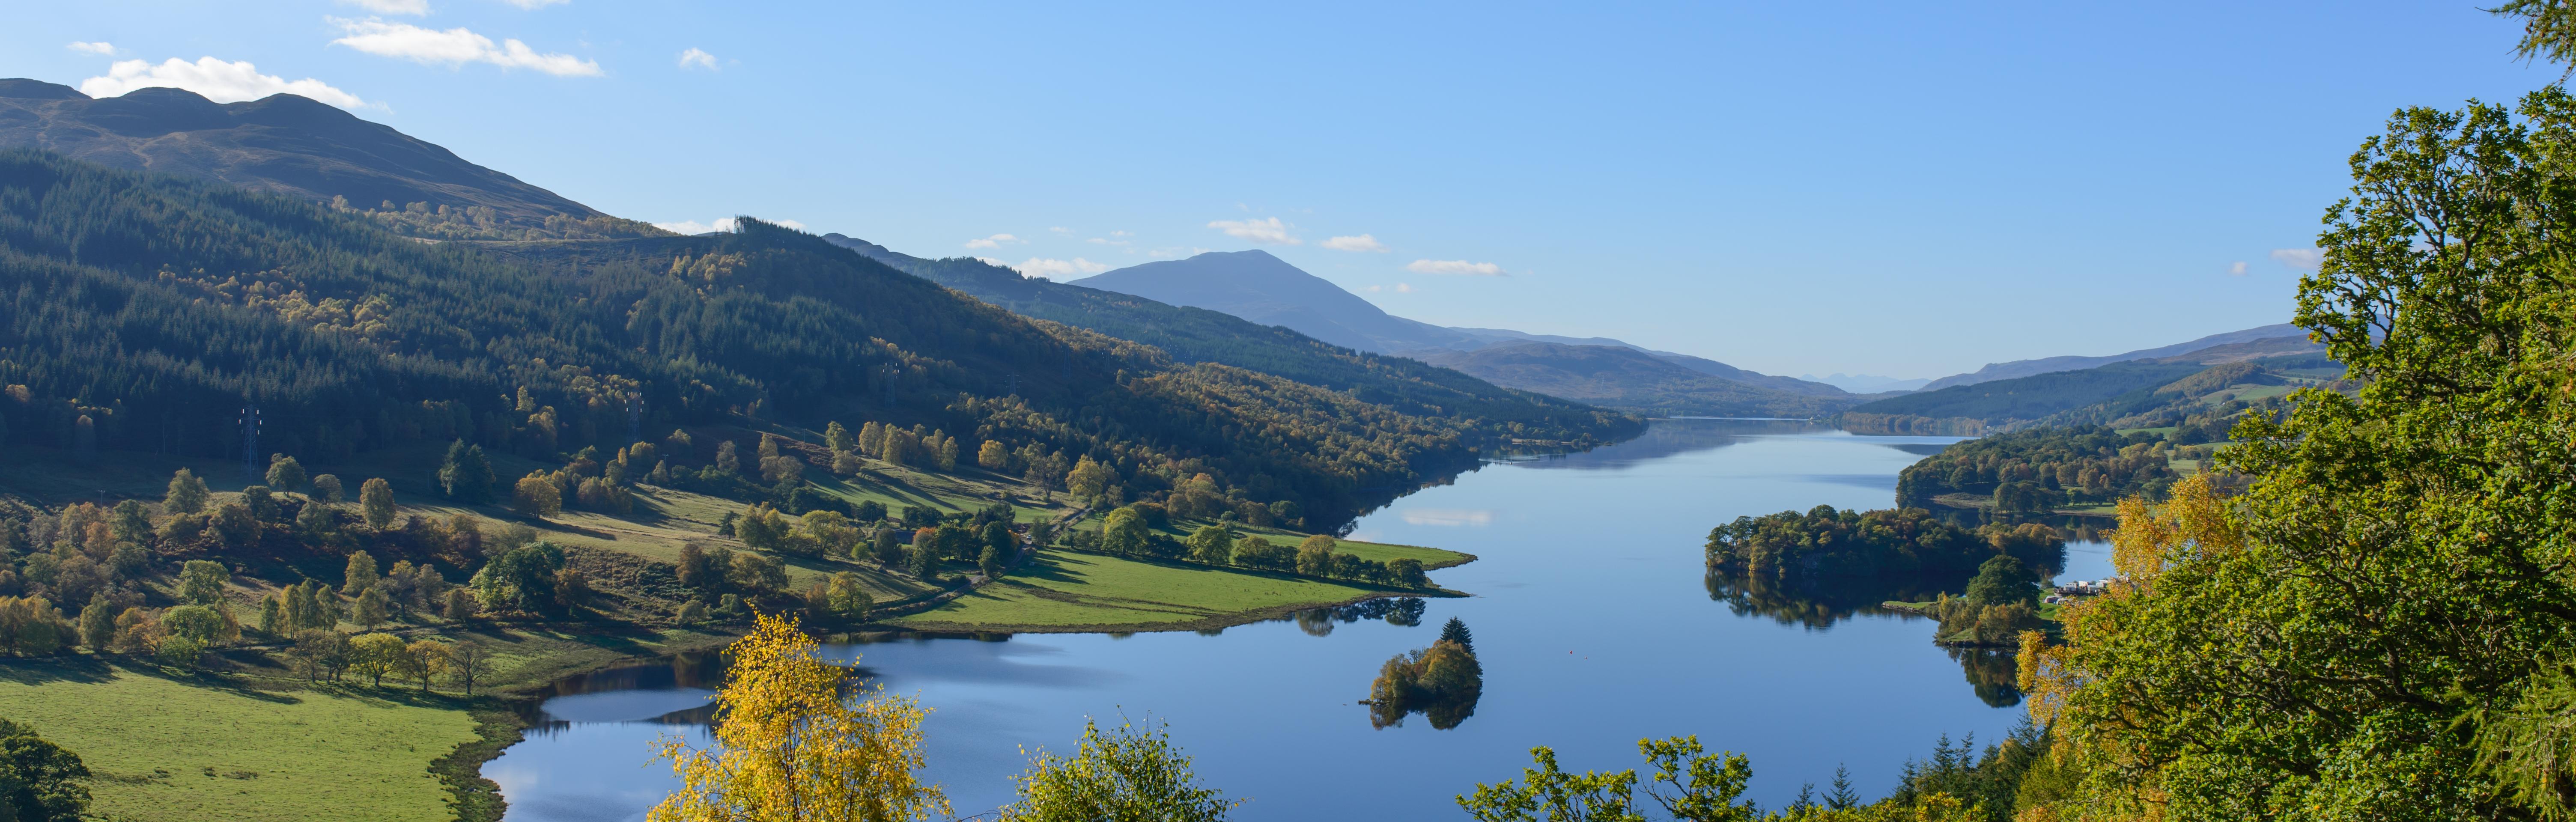 Day Trip to the Highlands - Lakes and Whiskey Distilleries - Small Group - Departing from Edinburgh